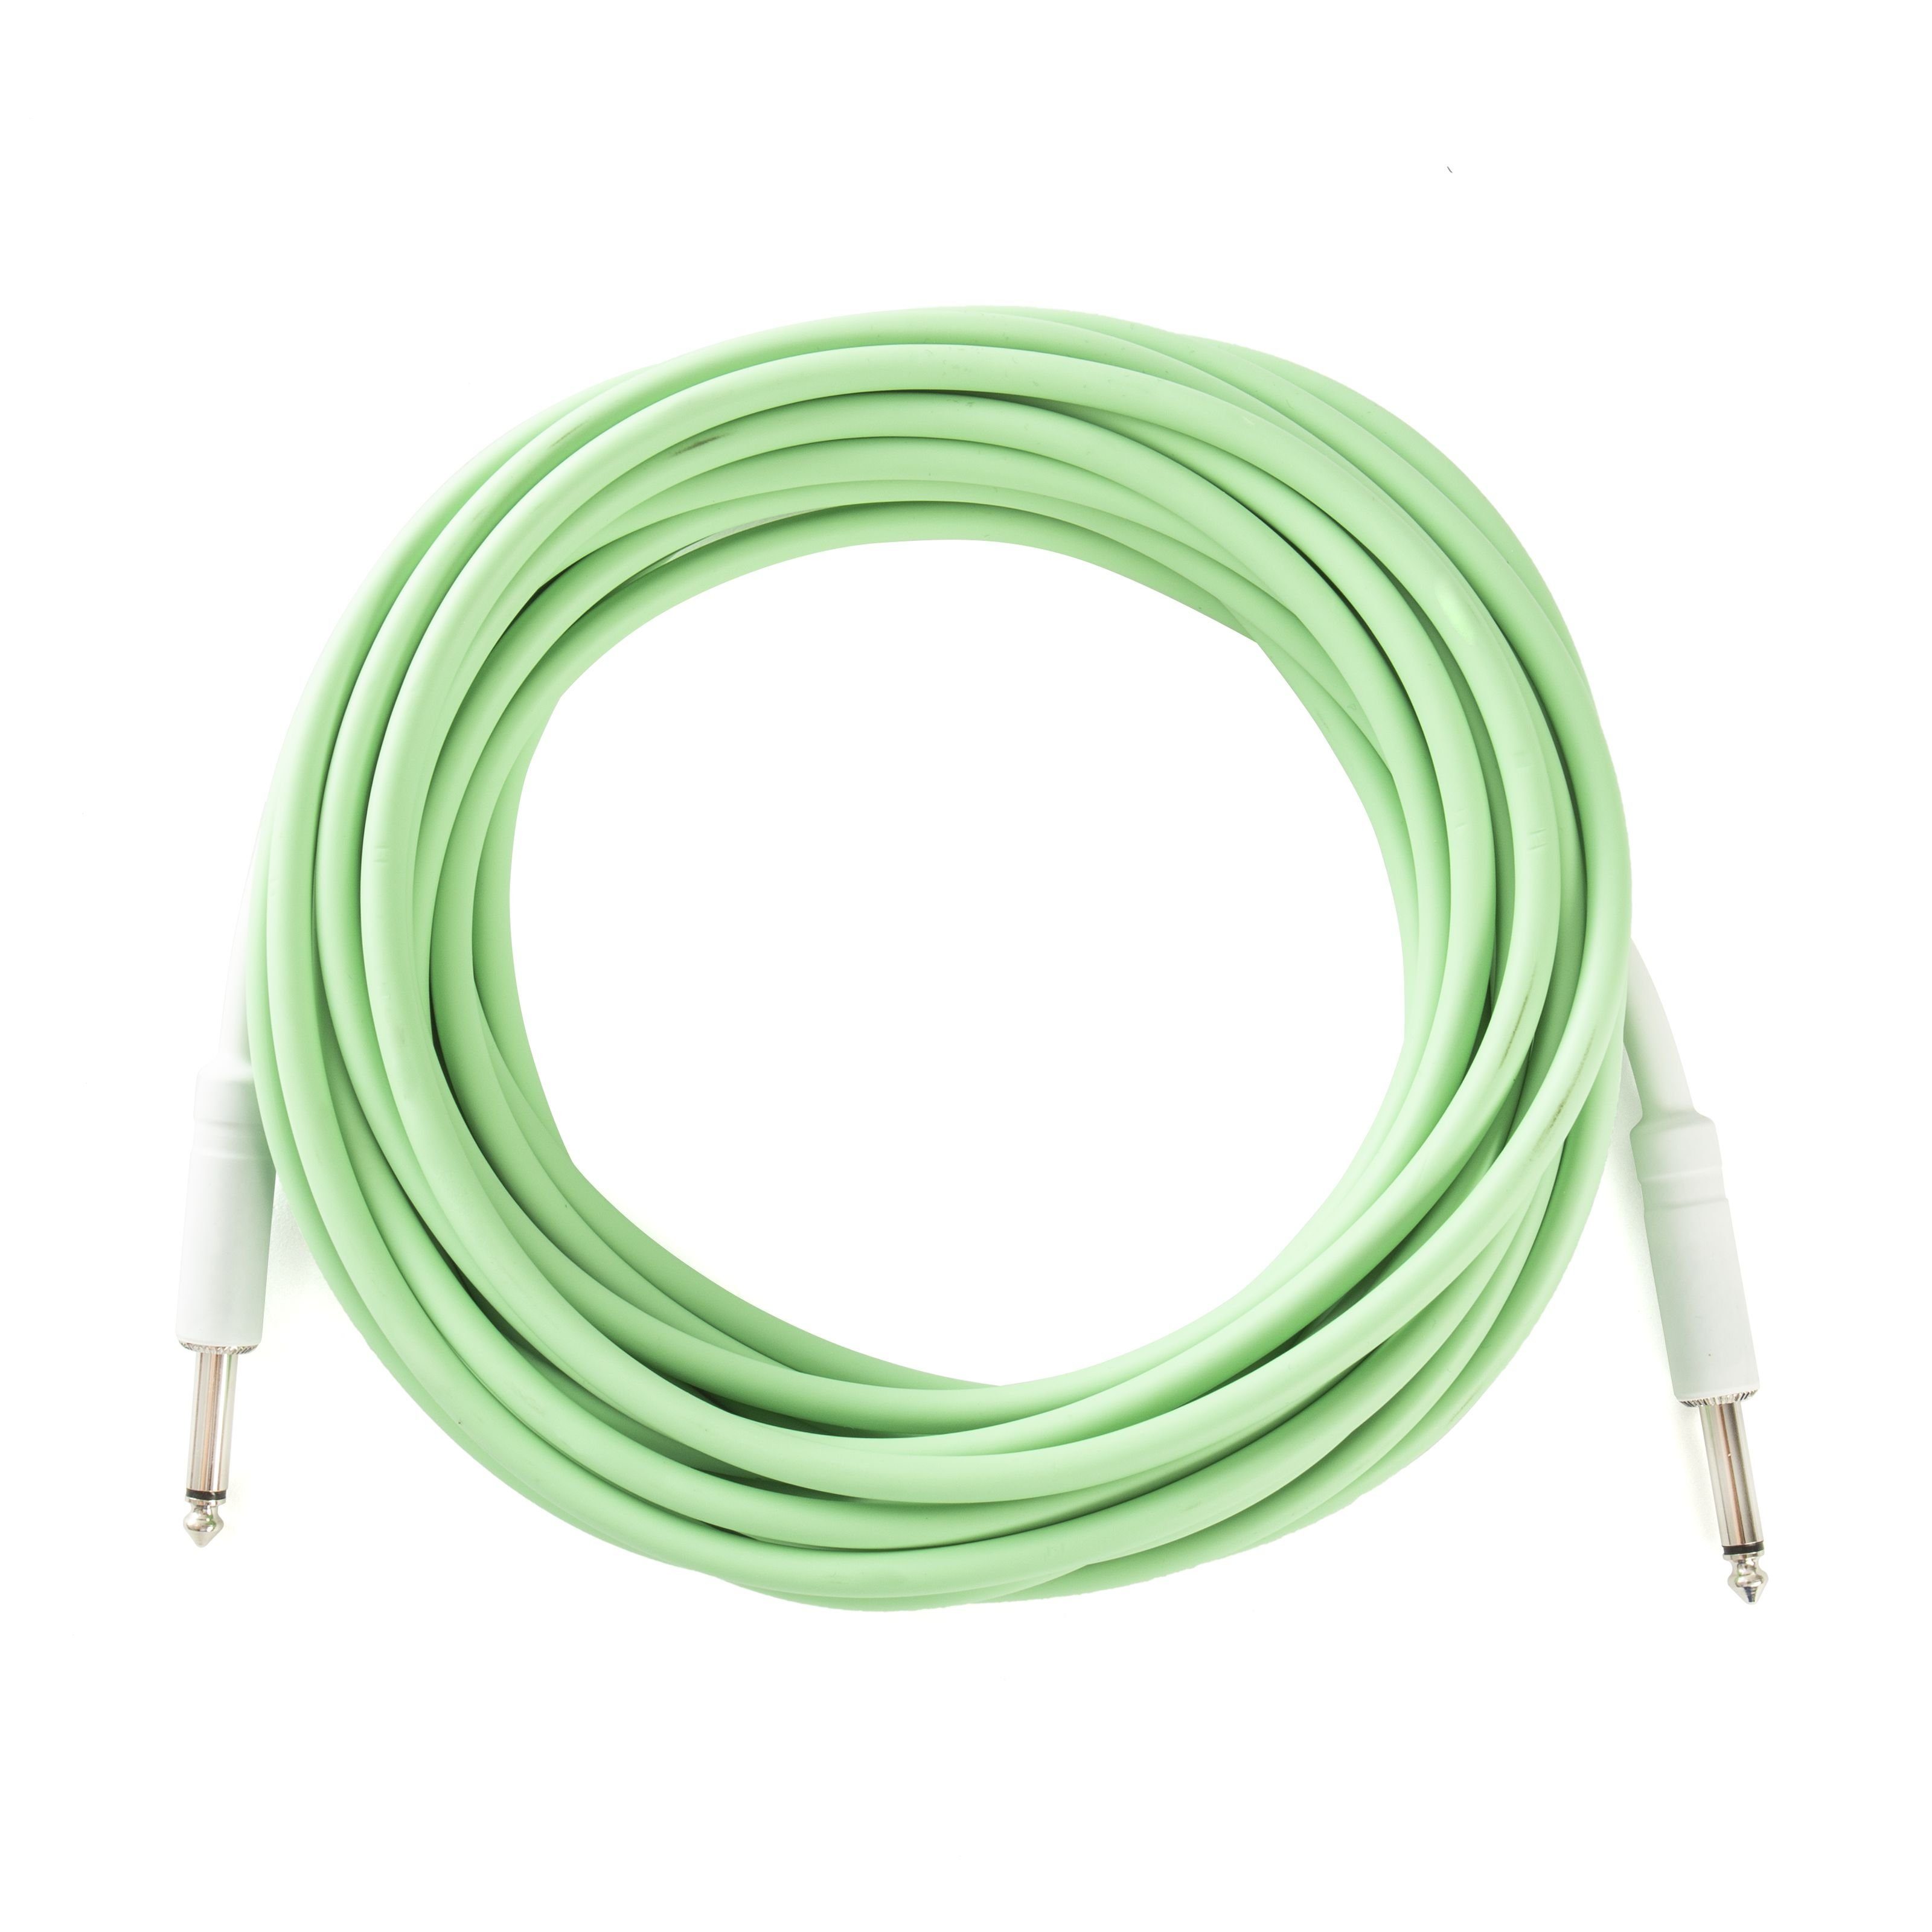 FAME Instrumentenkabel, Authentic Instrument Cable, High-Quality Guitar Cable, Green